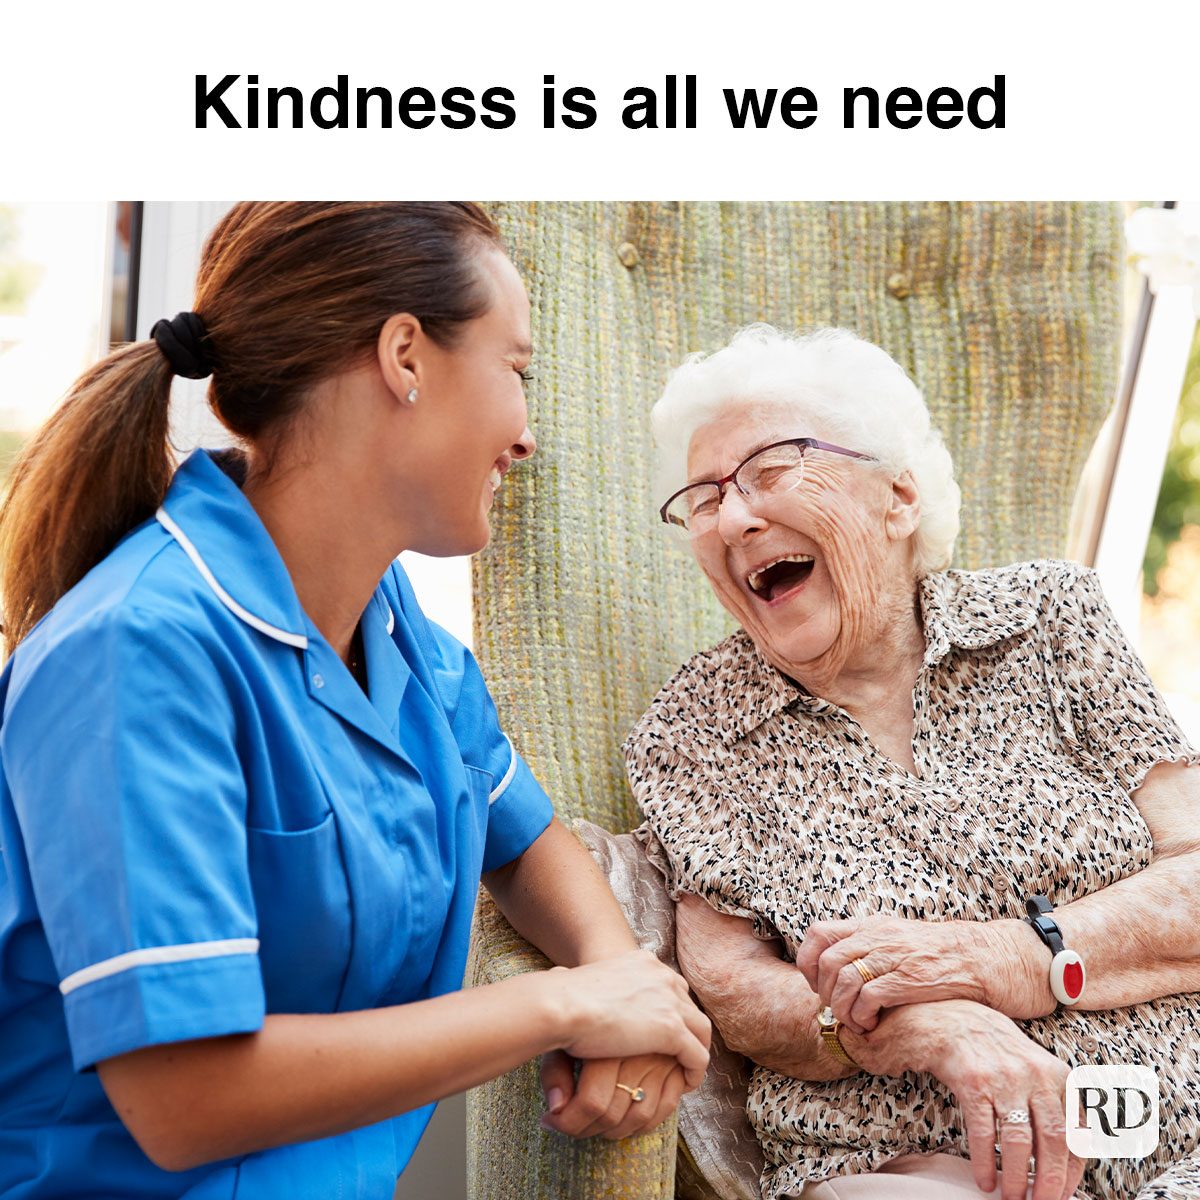 20 Kindness Memes That Spread Cheer — Funny Memes About Kindness